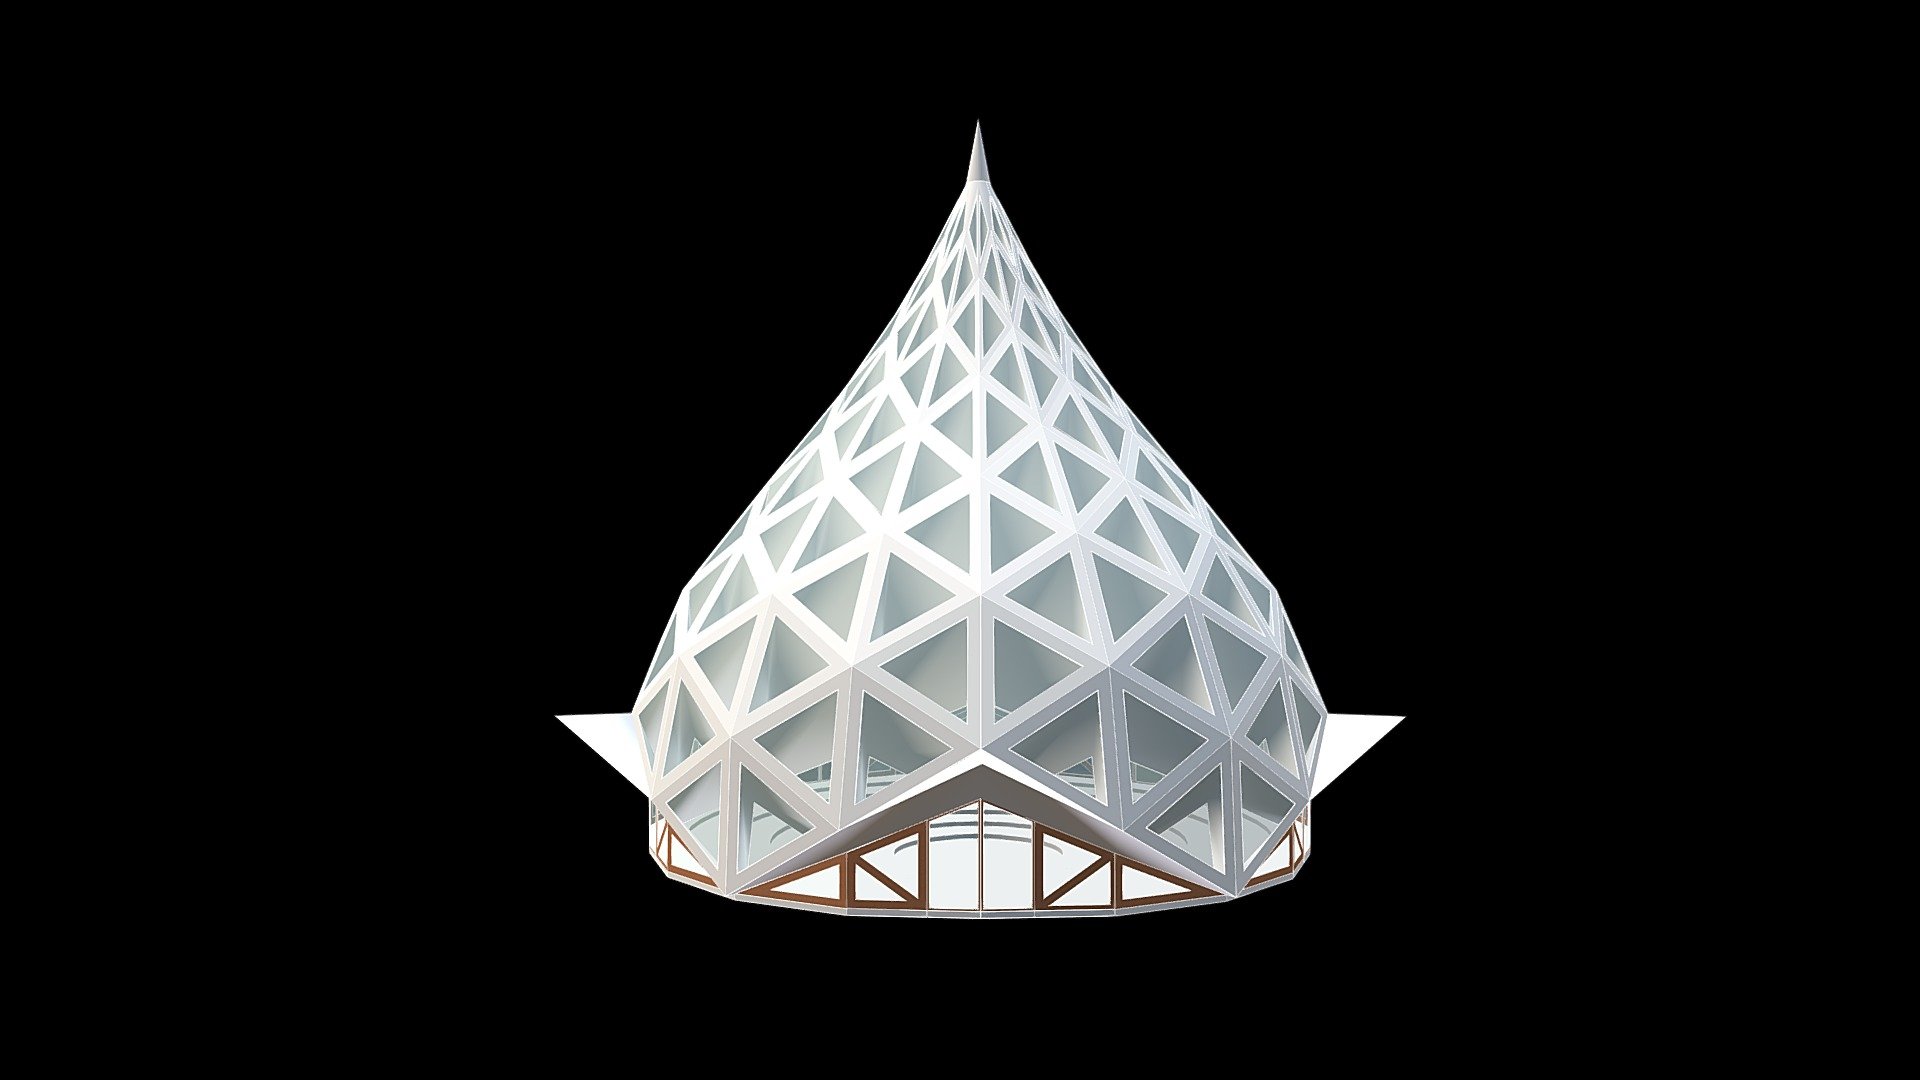 Meditation Centre. 
pentagonal onion dome integrated with spherical dome, computative triangulation for diffused light - Meditation Centre - 3D model by Arpan Jain (@ArpanJain) 3d model